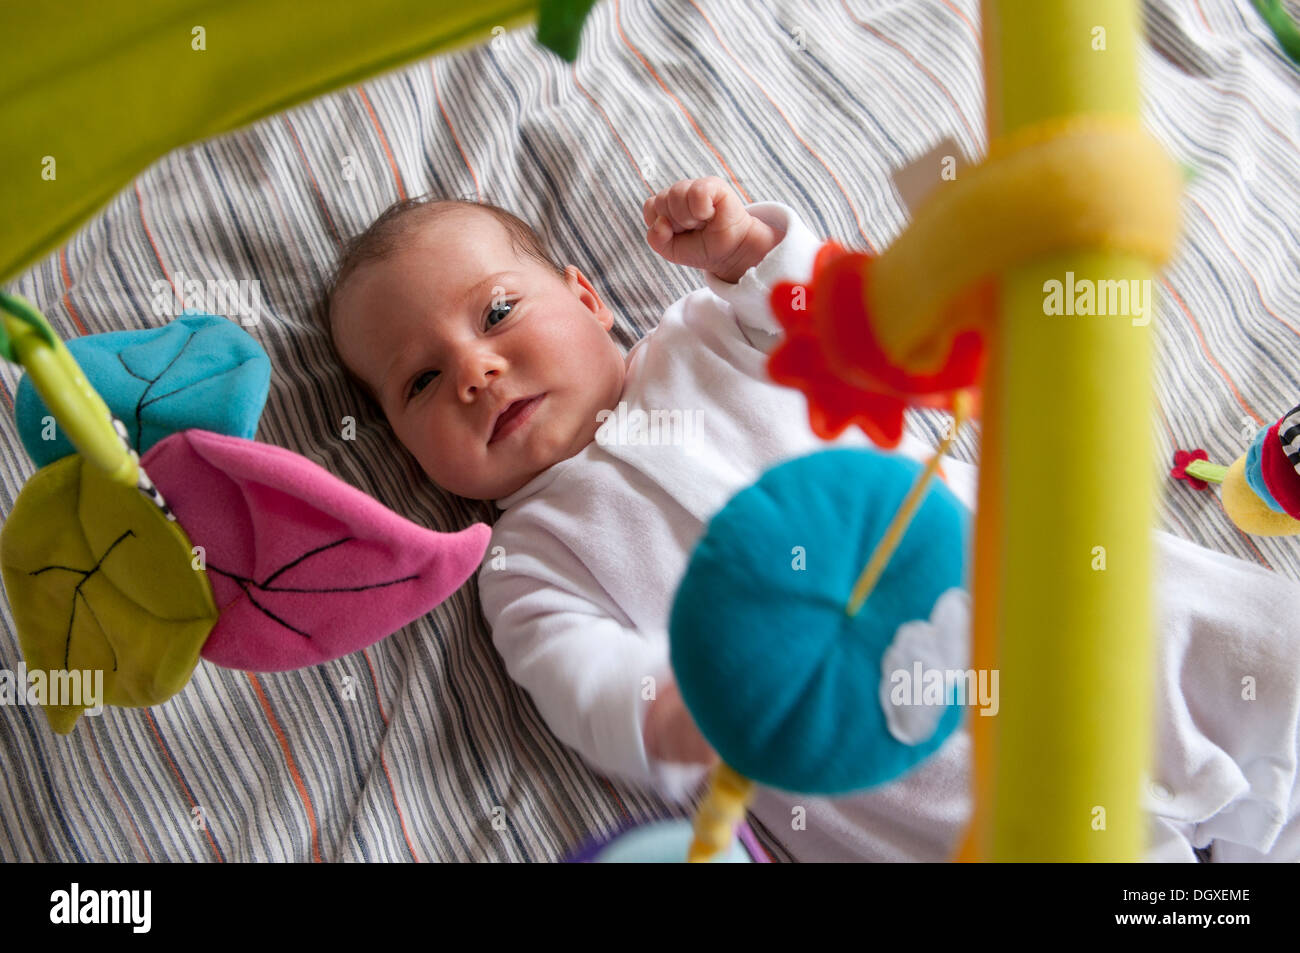 Little baby girl lying under a play gym Stock Photo